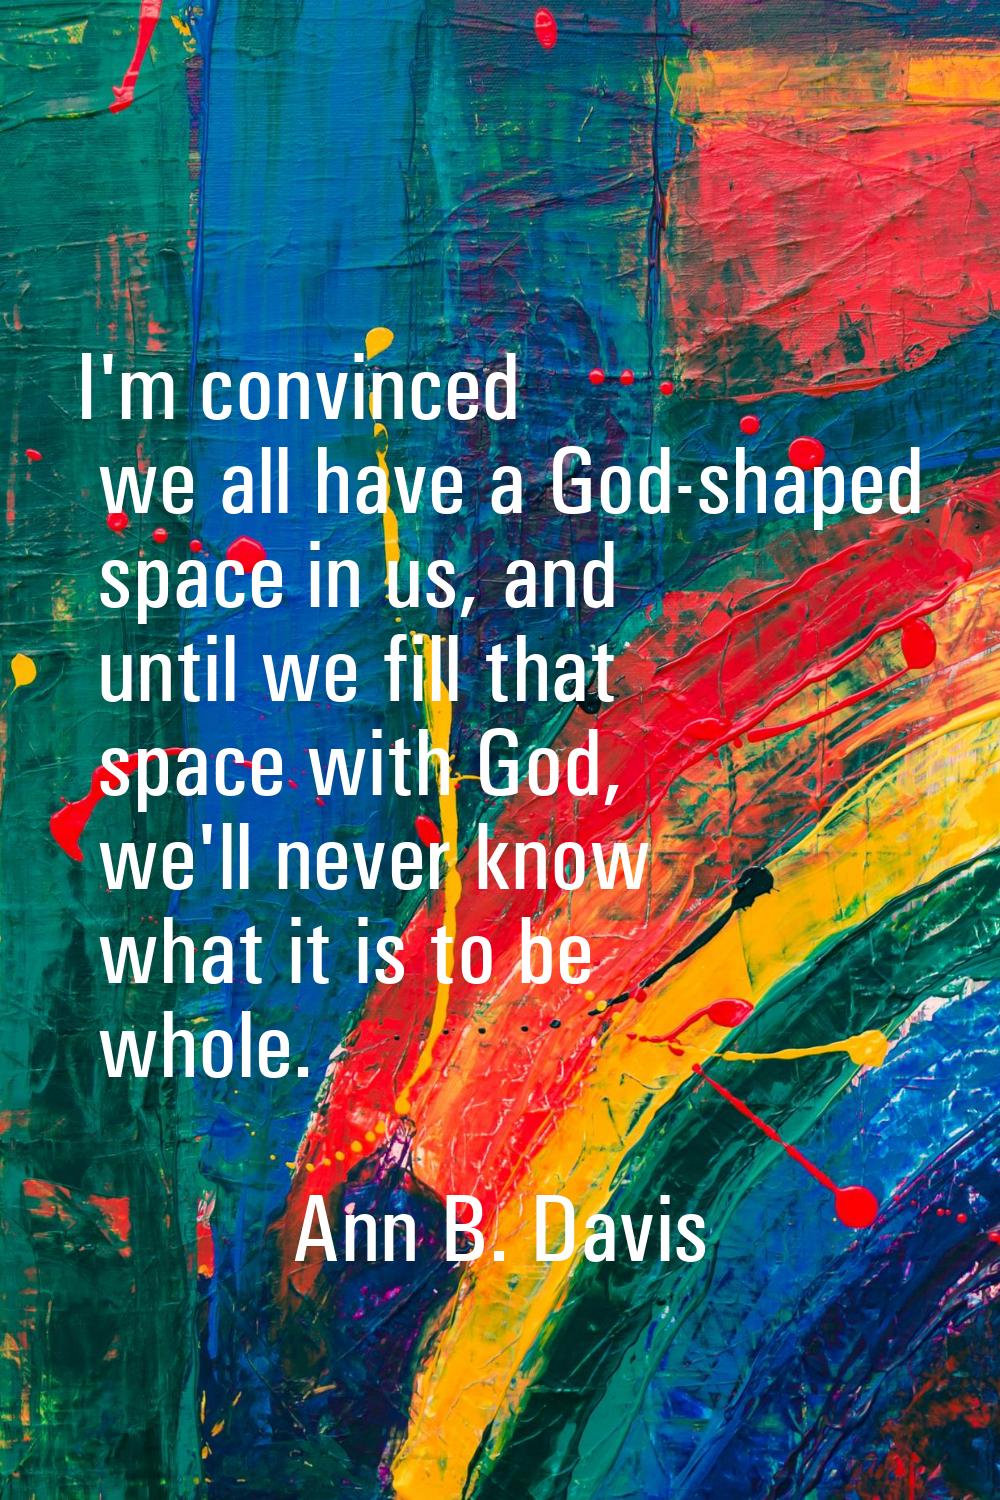 I'm convinced we all have a God-shaped space in us, and until we fill that space with God, we'll ne